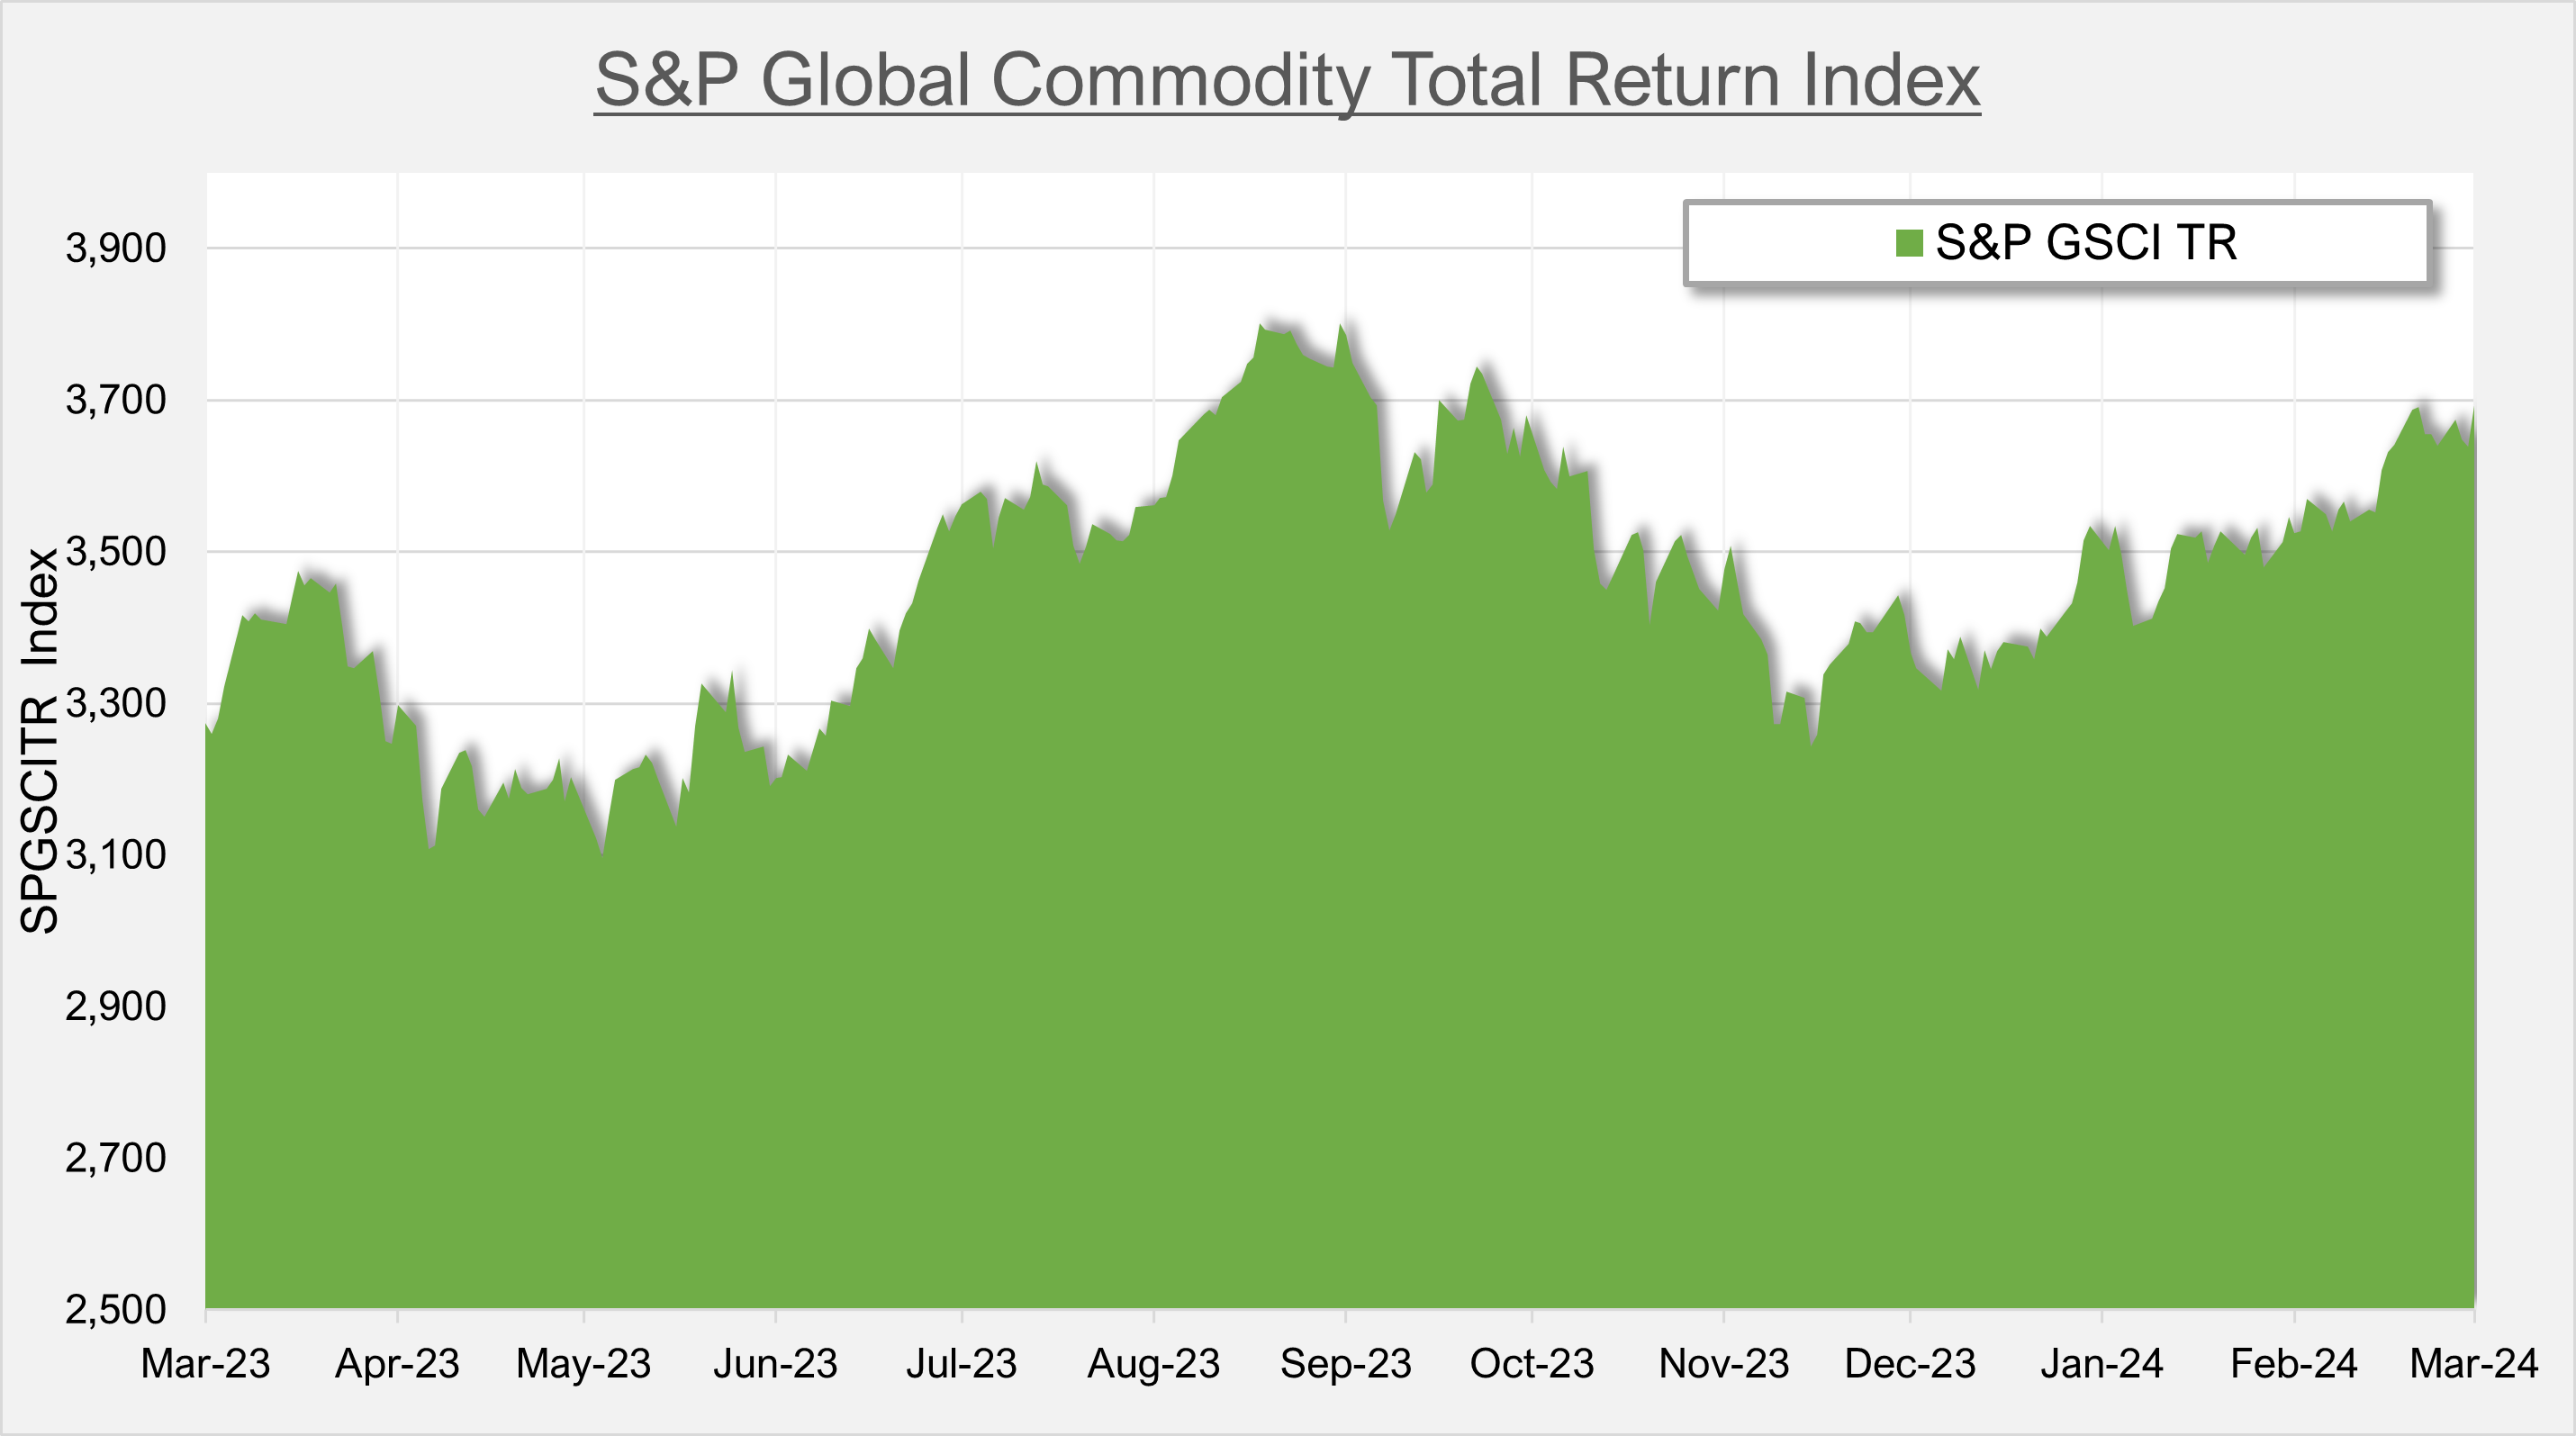 S&P Global Commodity Total Return Index - Bullish Commodity Trend Continues